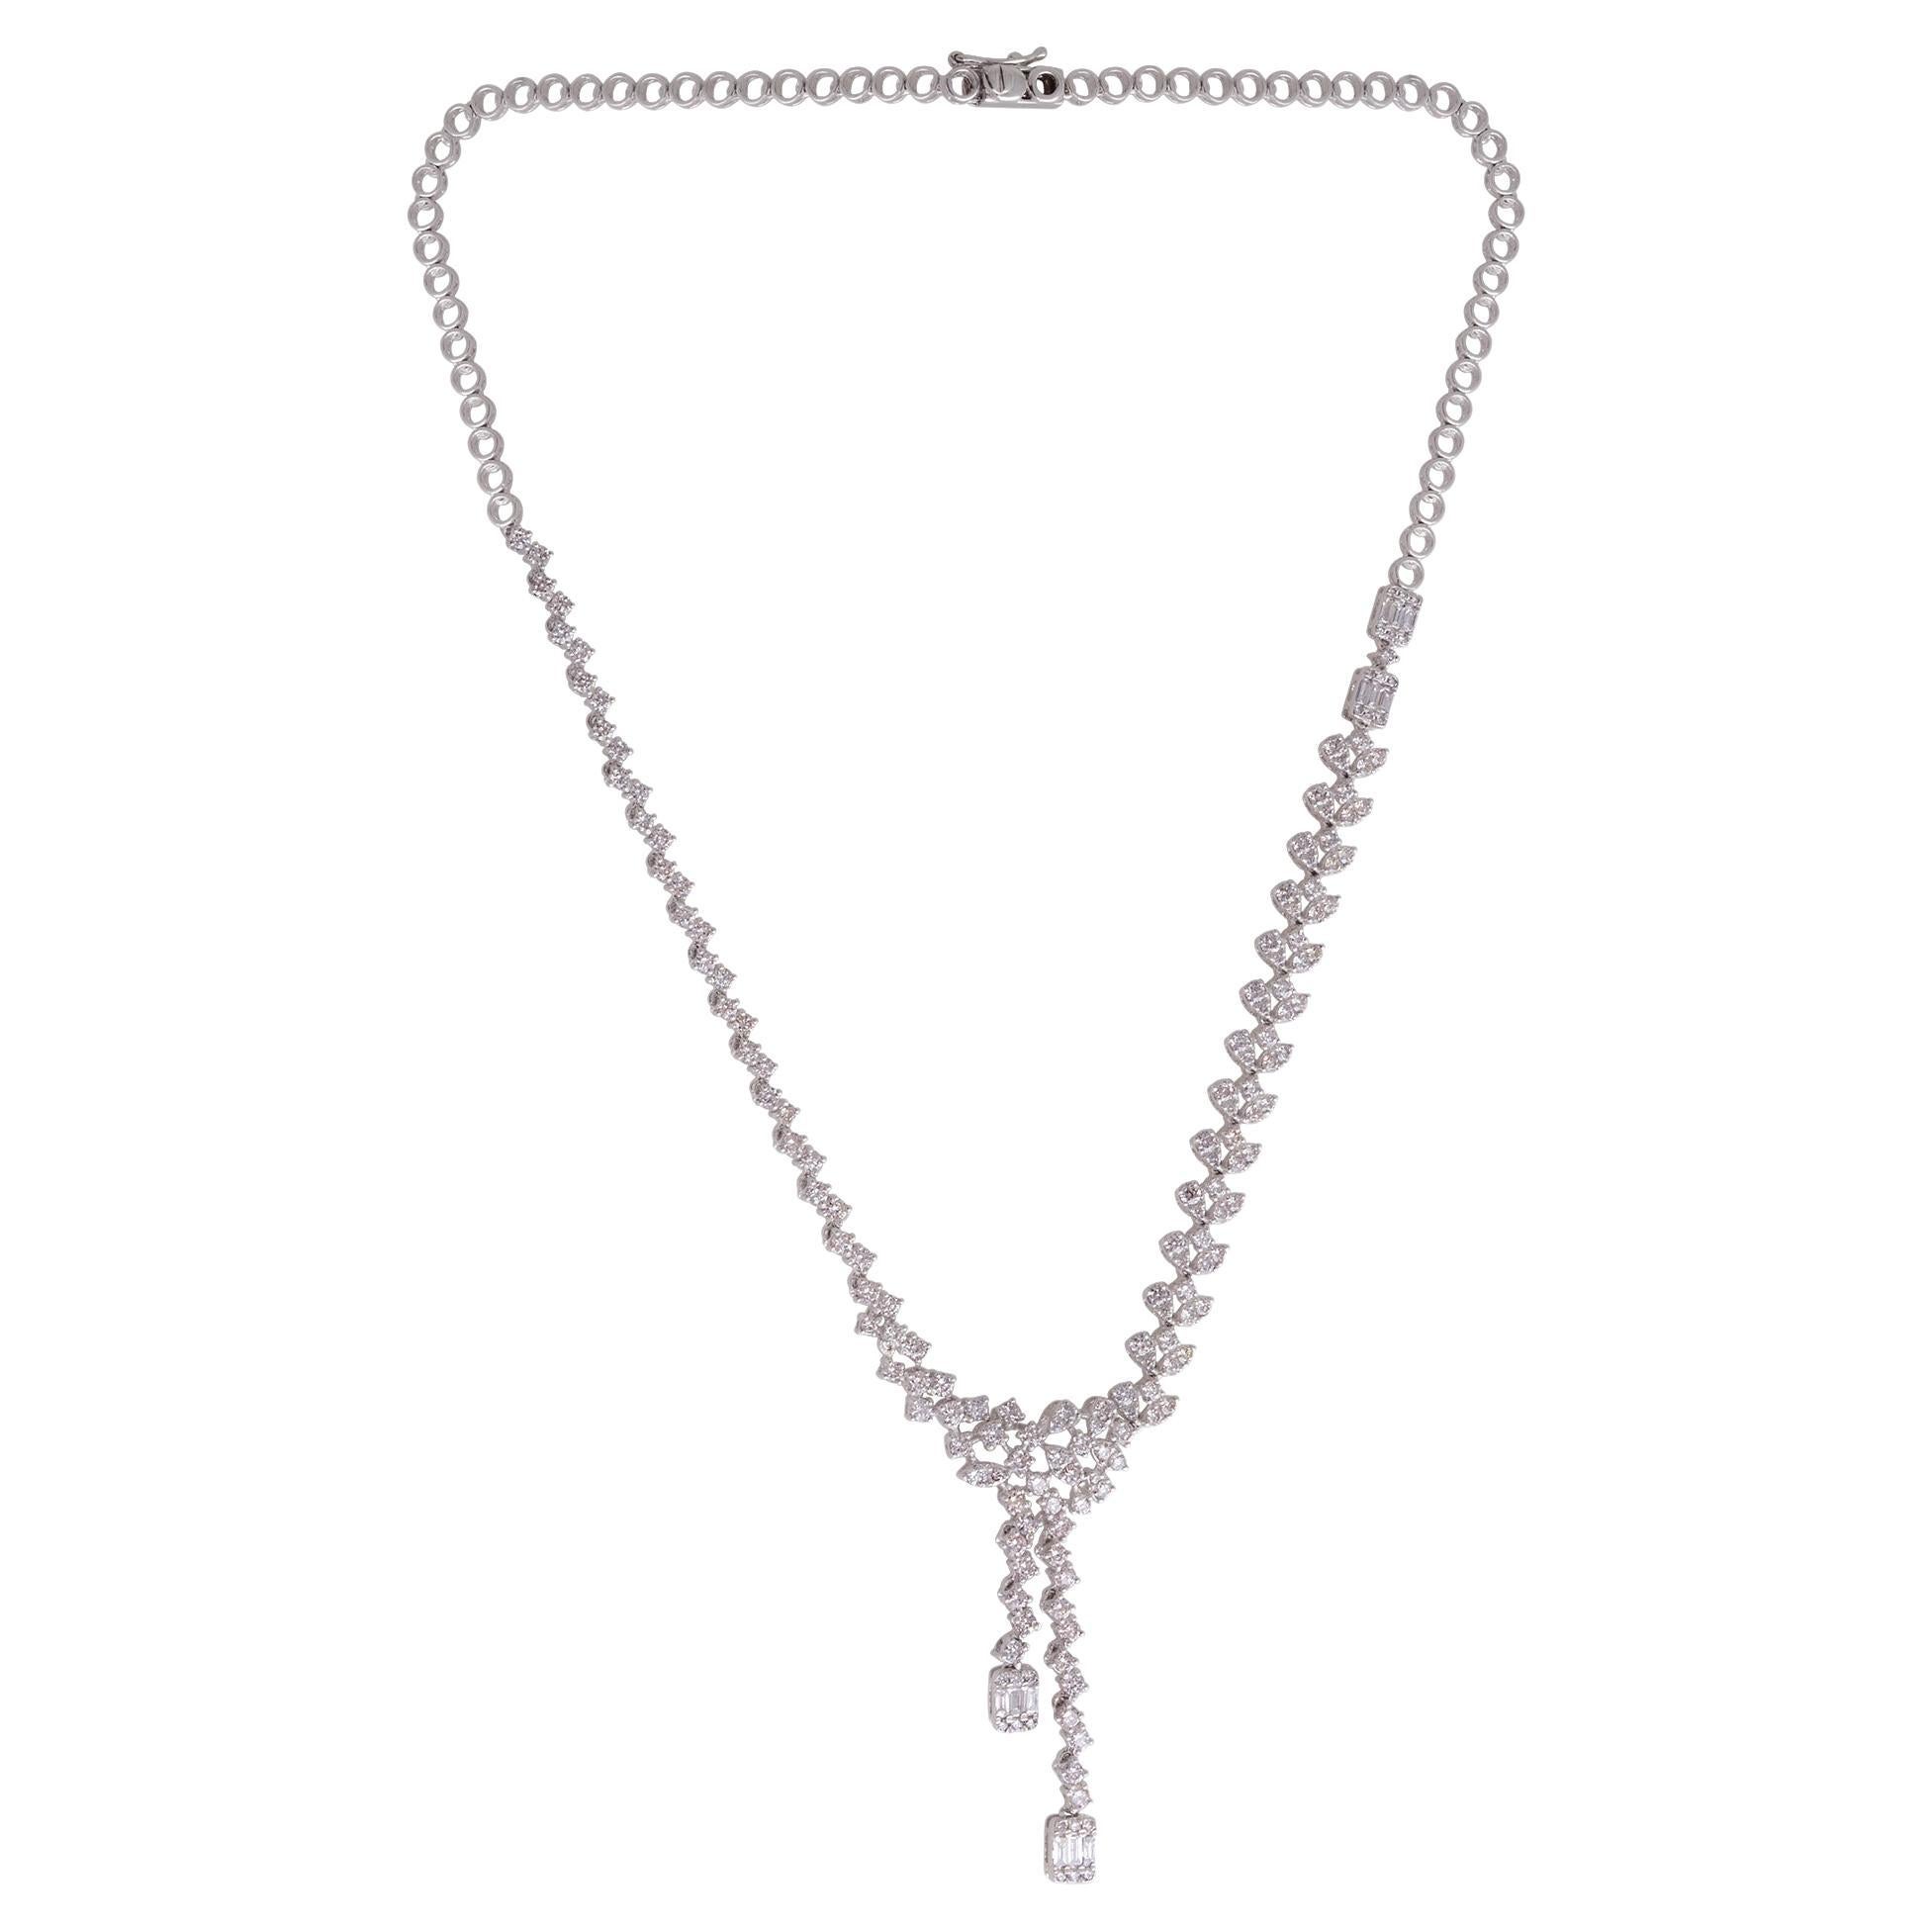 5.80 Carat Baguette Diamond Lariat Necklace Solid 18k White Gold Fine Jewelry For Sale